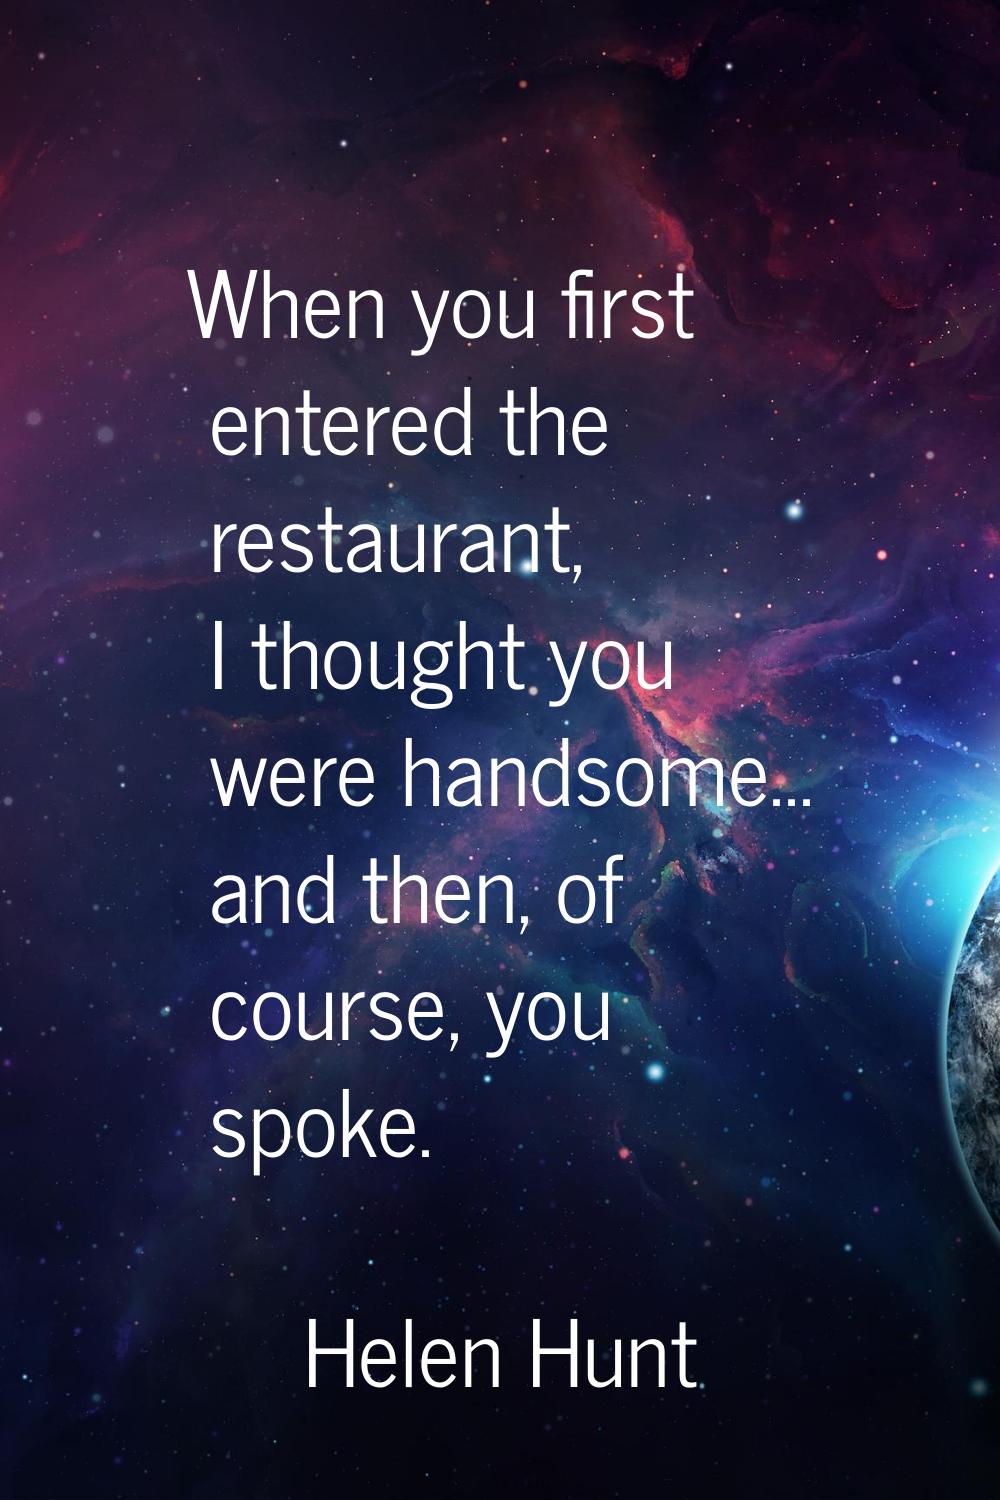 When you first entered the restaurant, I thought you were handsome... and then, of course, you spok